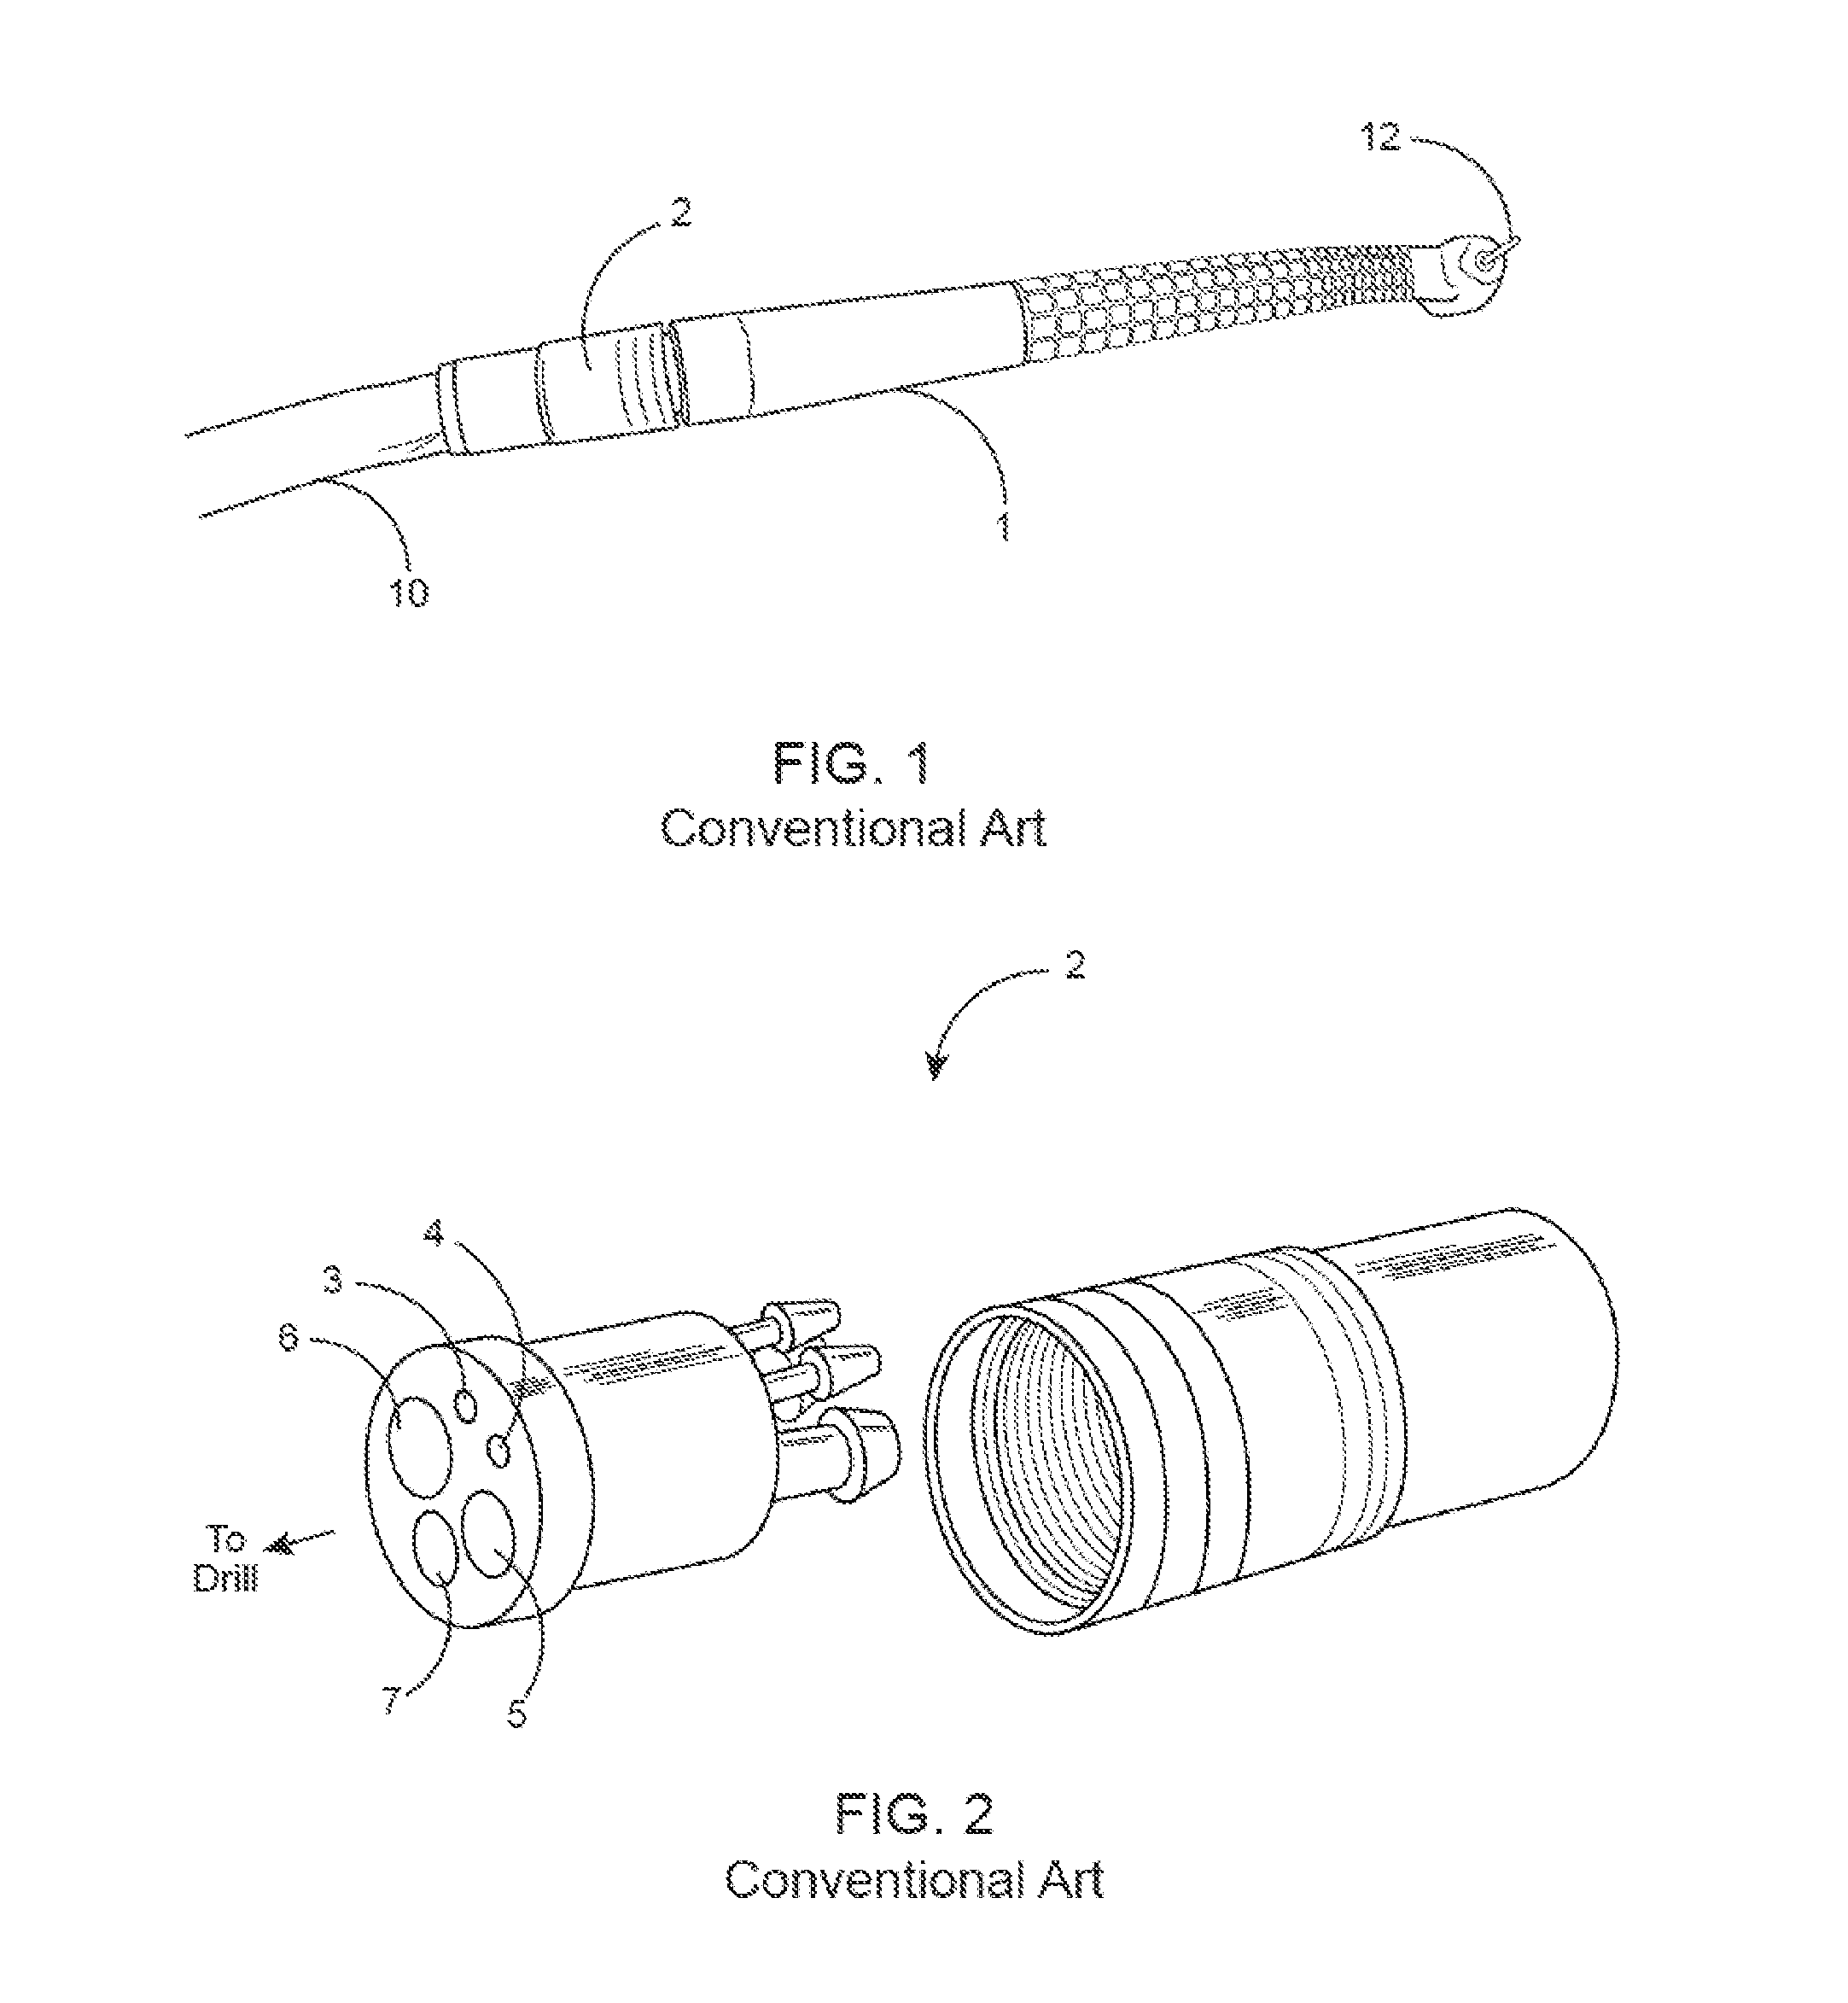 Ergonomically optimized, in-line water valve assembly for use with a dental handpiece